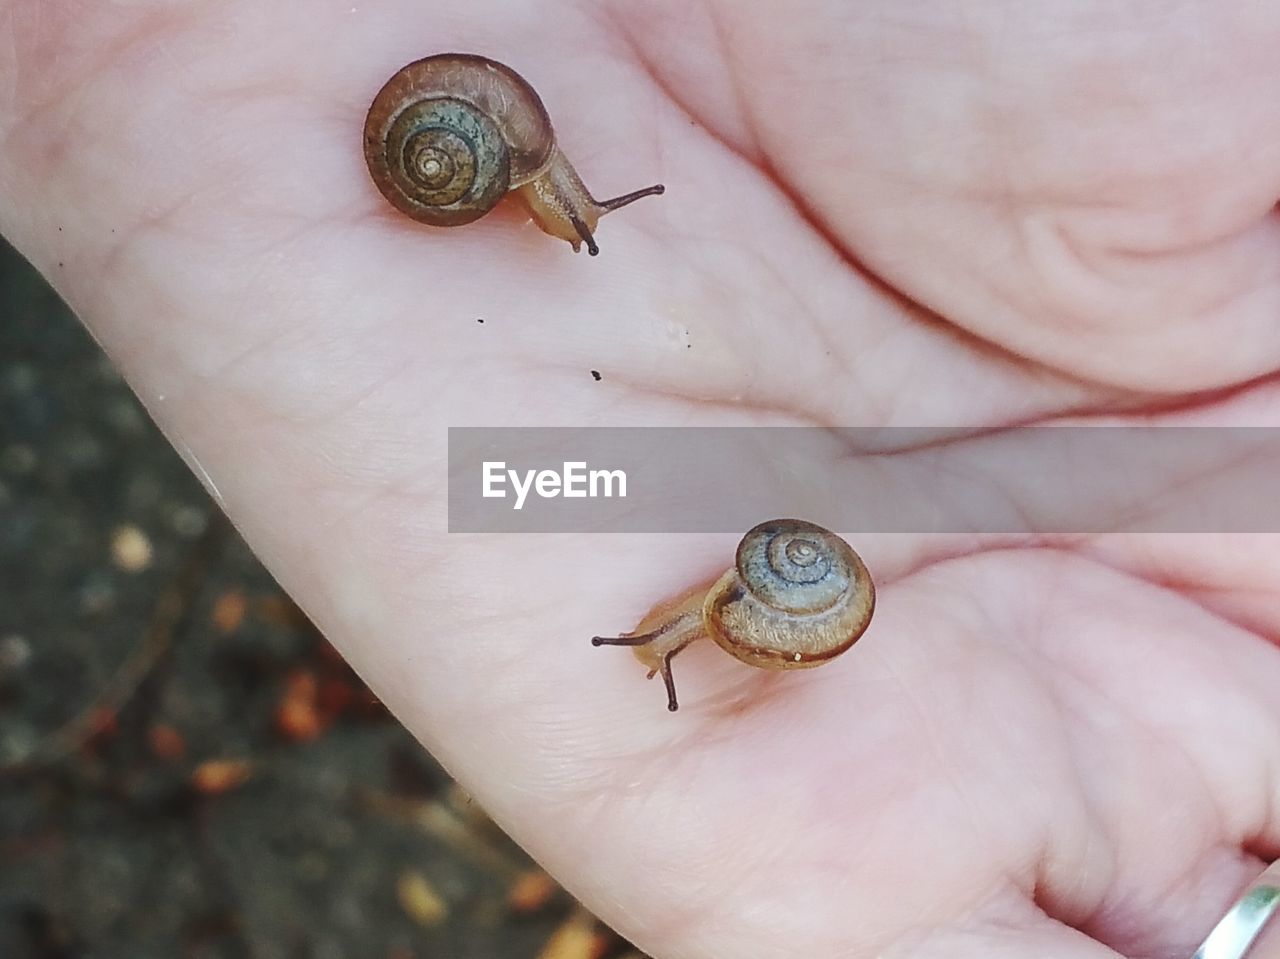 CLOSE-UP OF SNAIL ON PERSON HAND